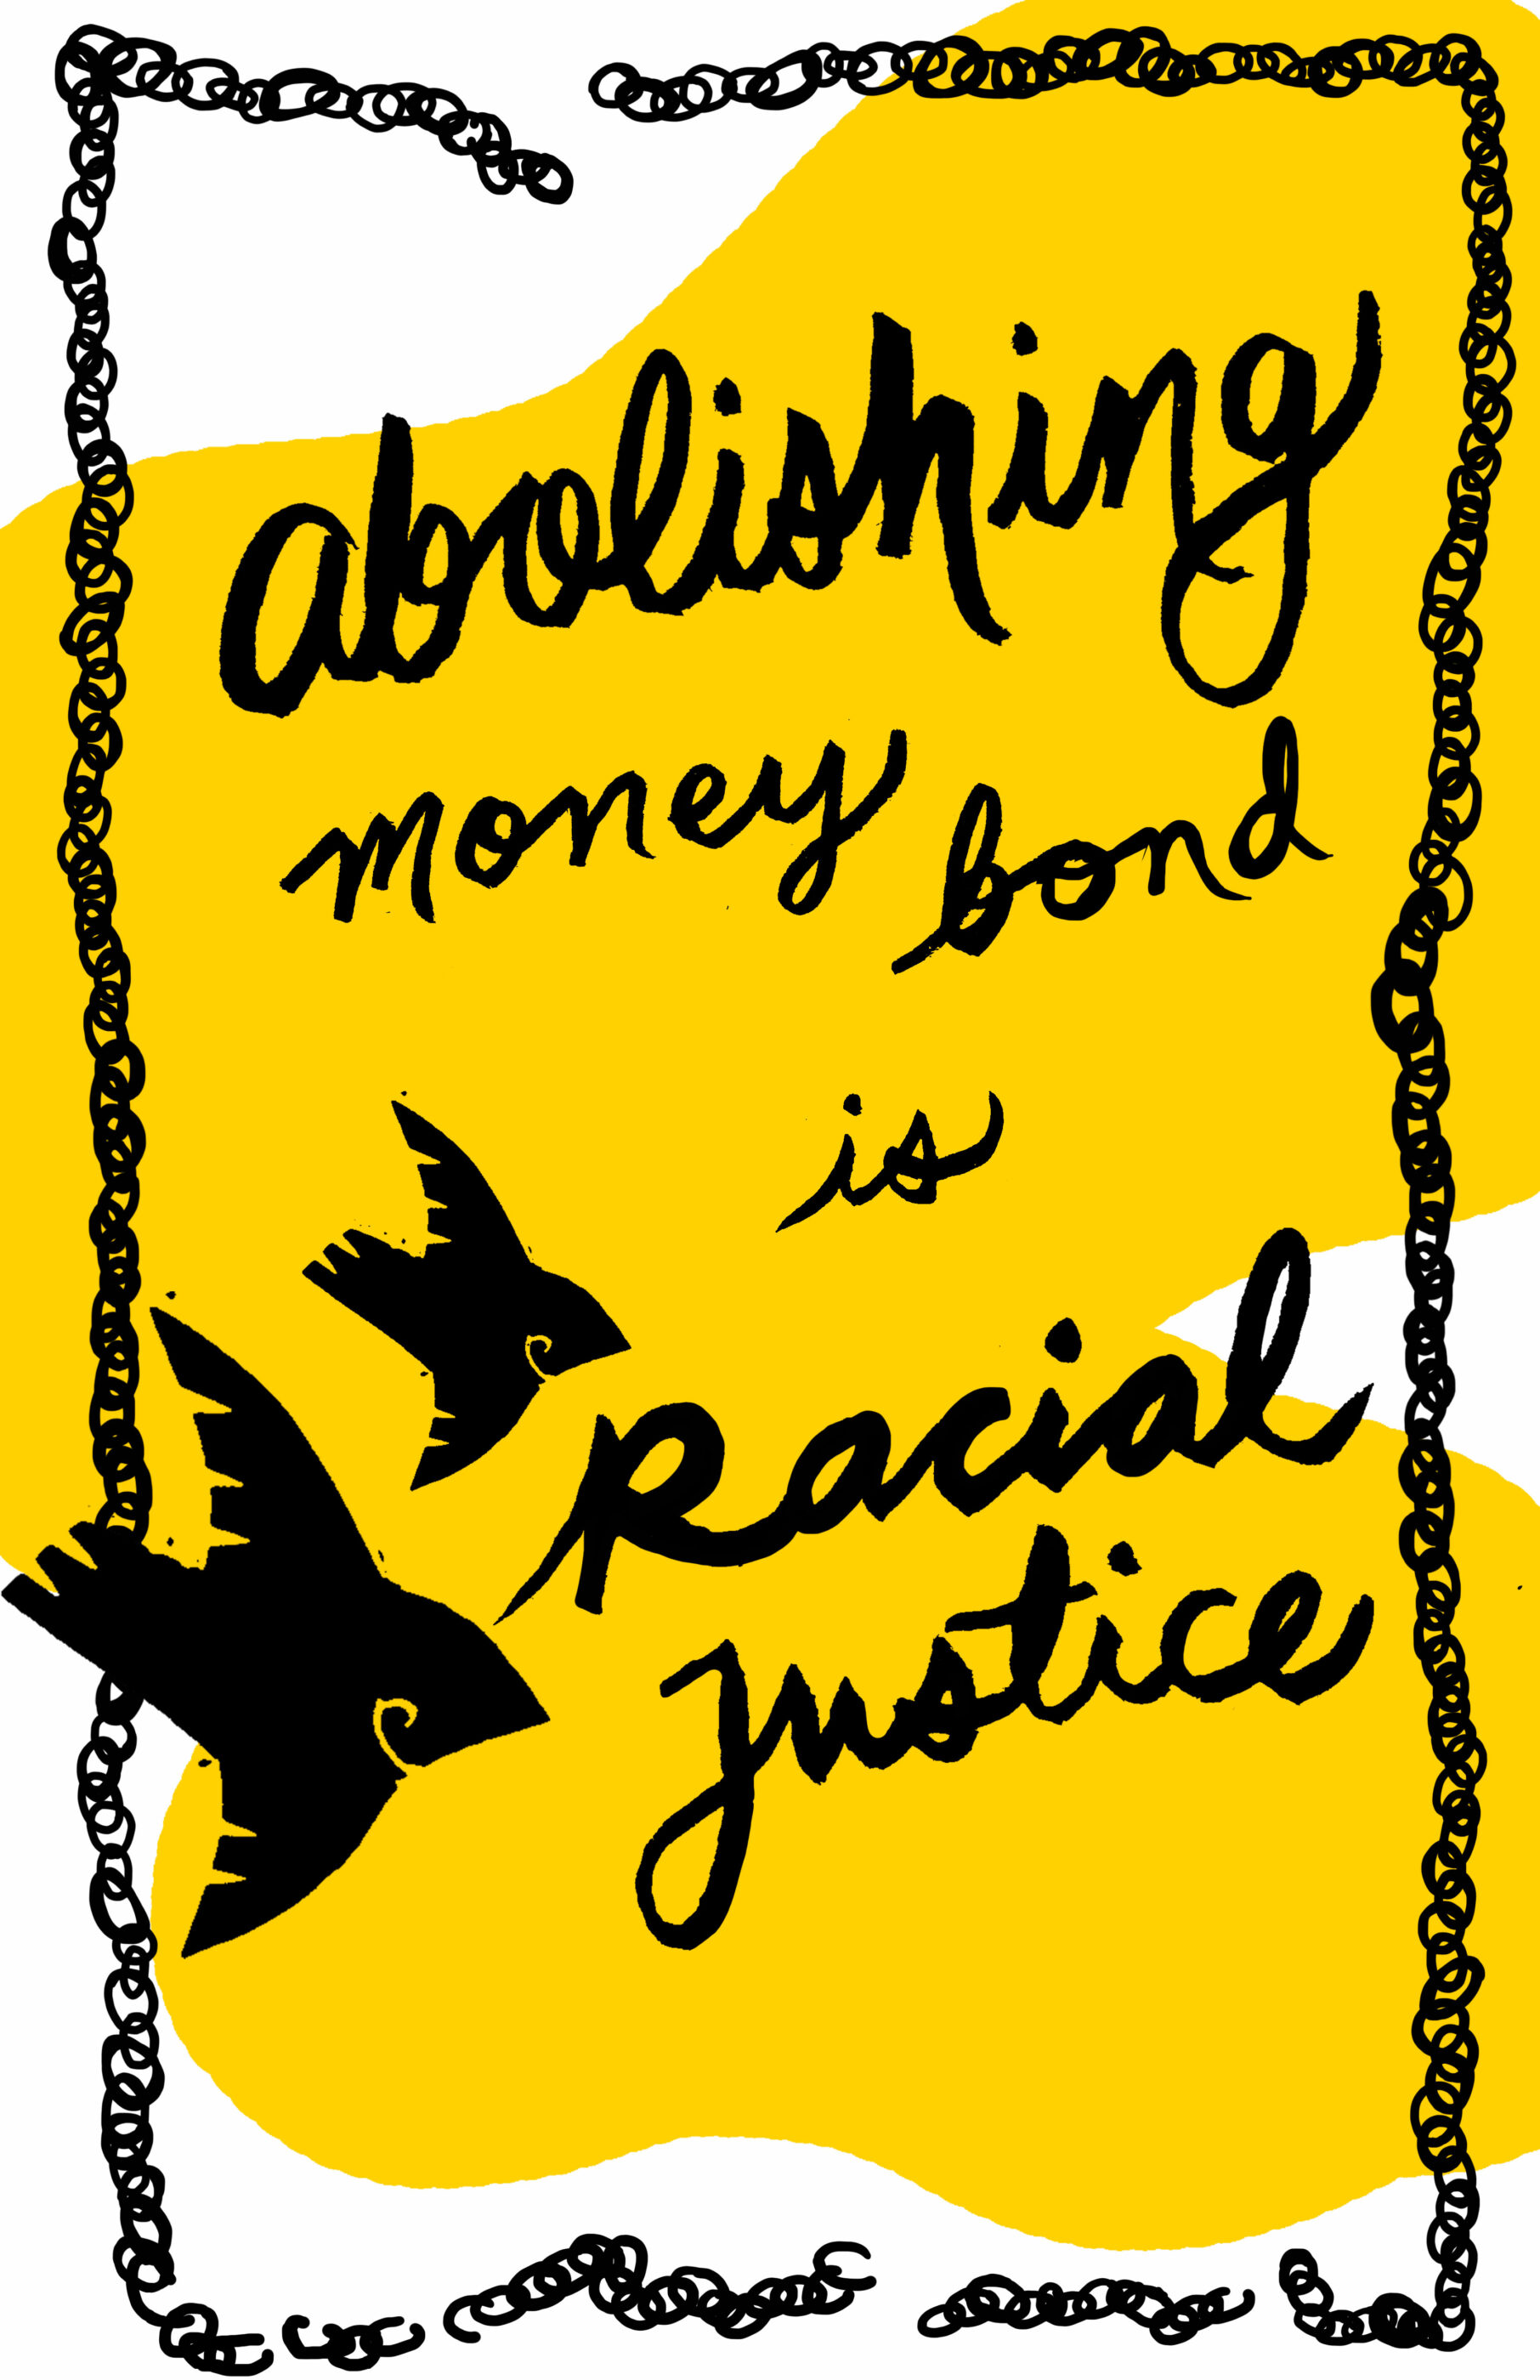 Artwork by Andrea Narno. Image is an illustration of two black birds flying across a border of broken chain links next to the words “Abolishing money bond is racial justice” over a splash of yellow in the background.